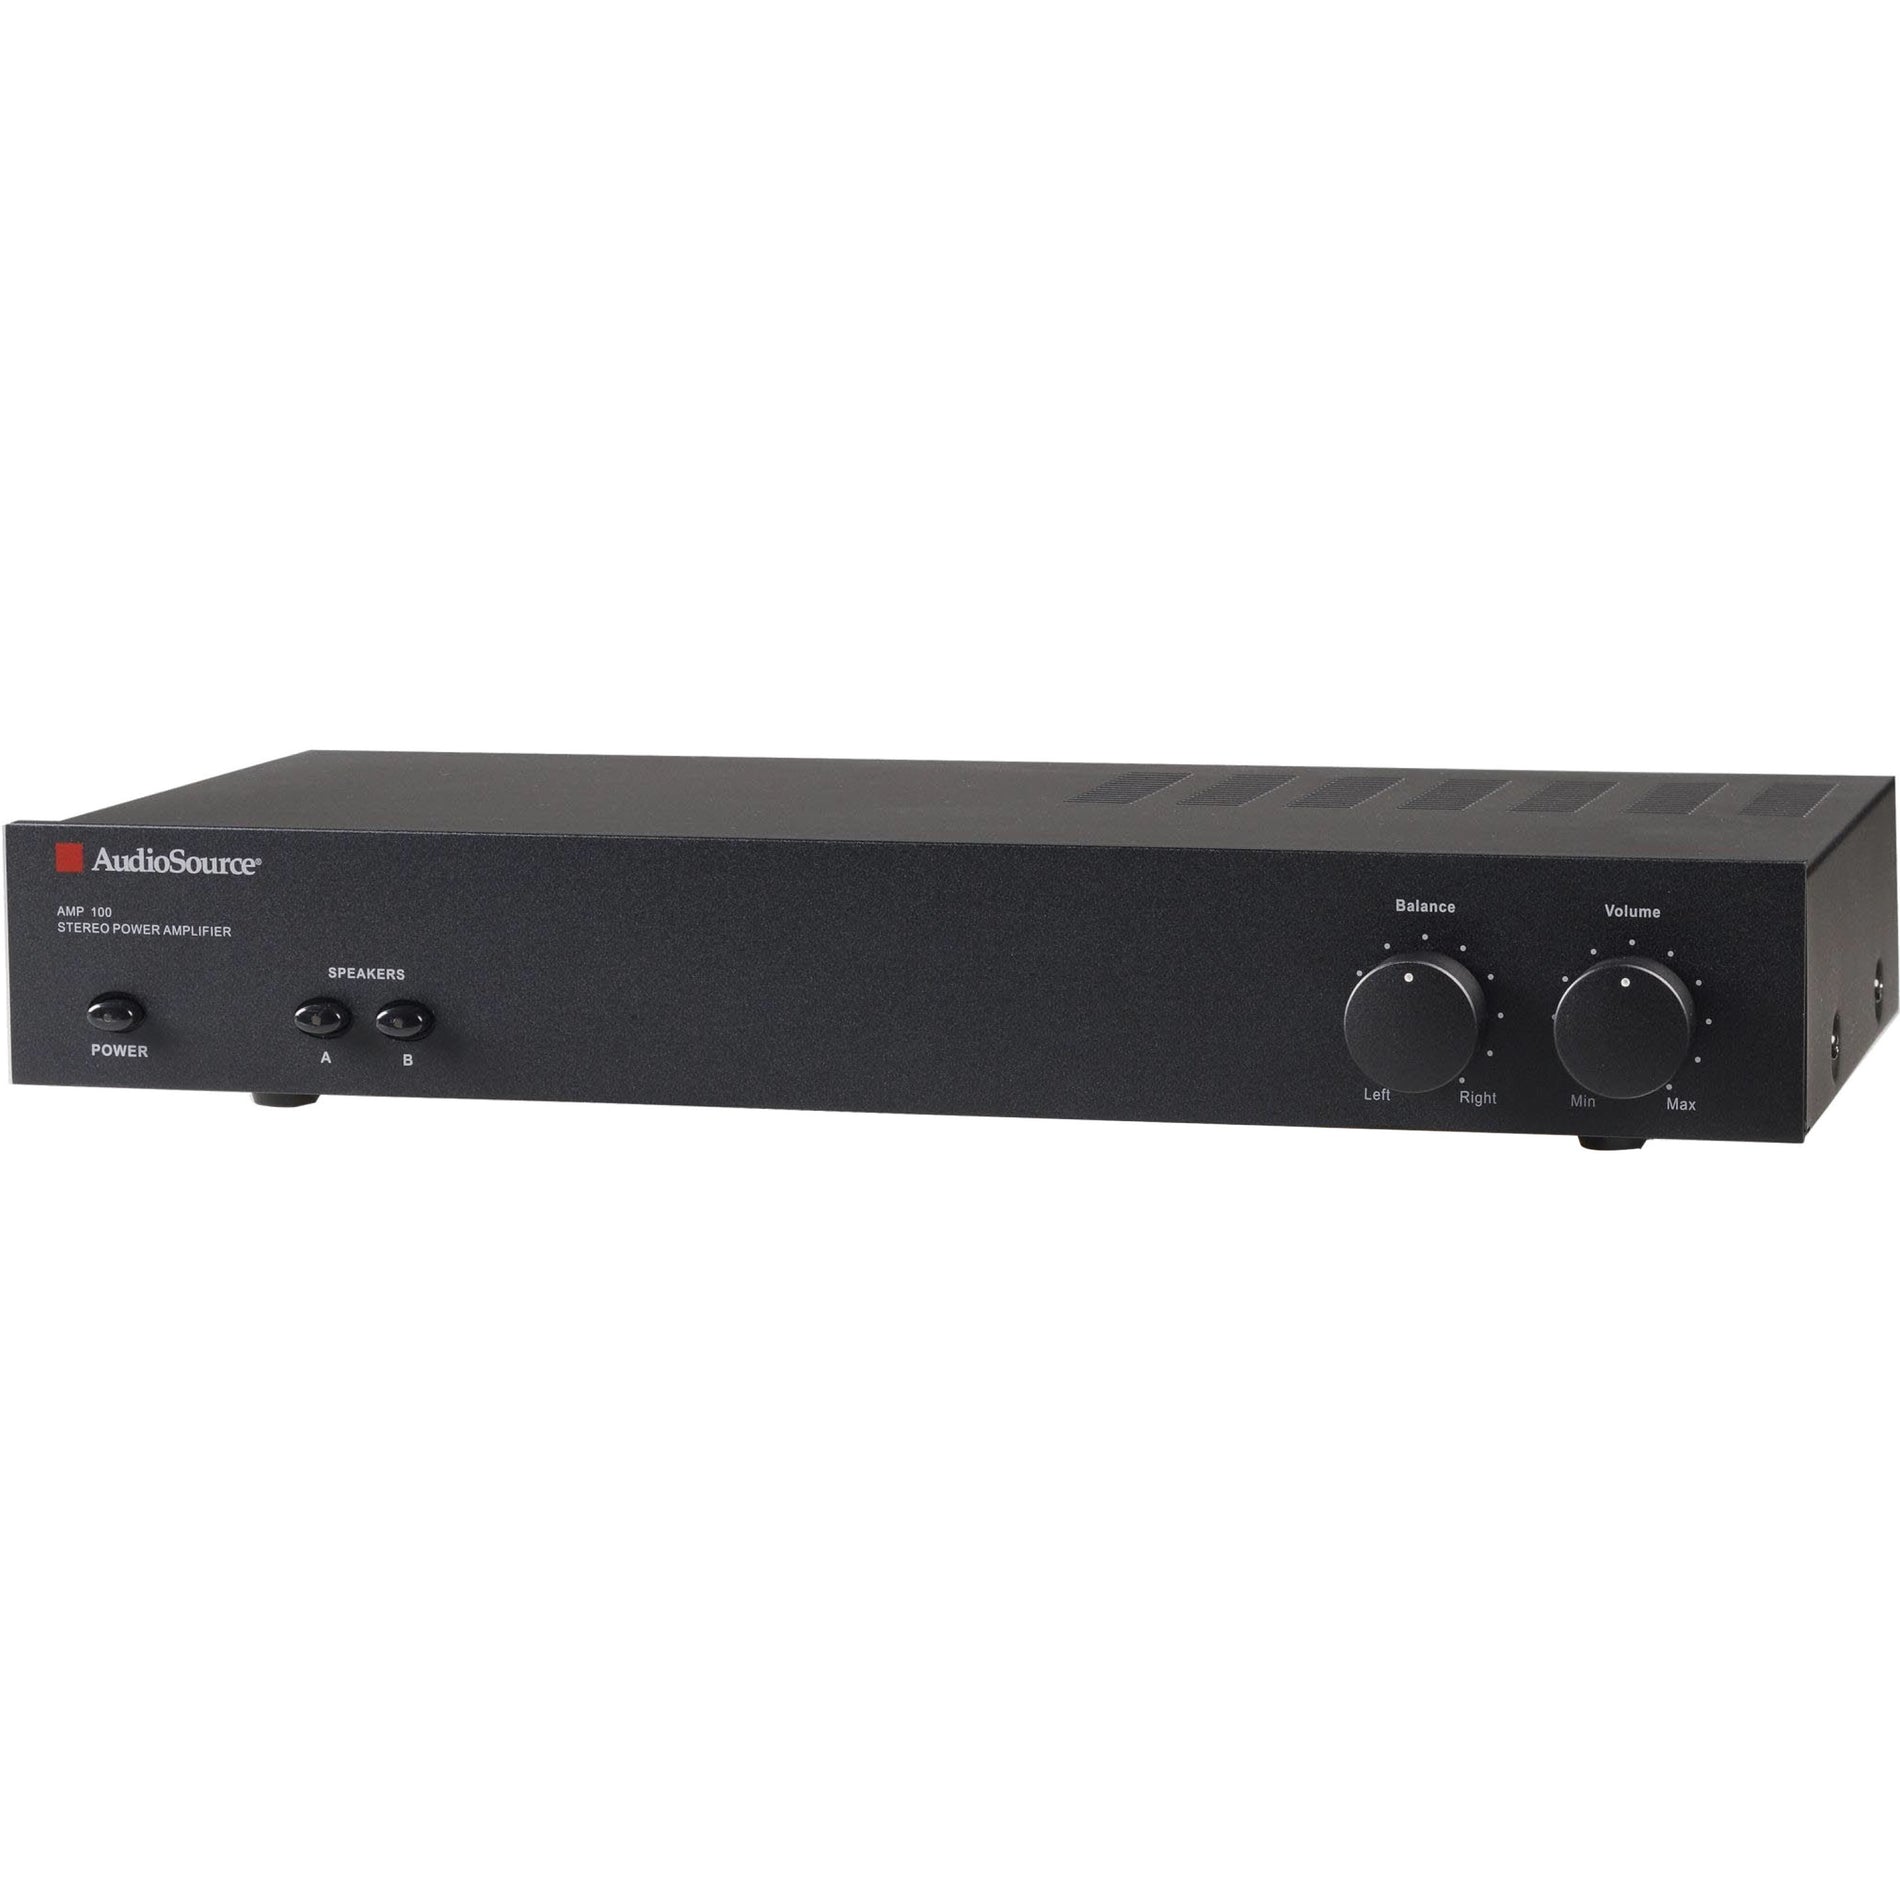 AudioSource AMP100VS Amplifier - 100W RMS, 2 Channel, Powerful Audio Performance